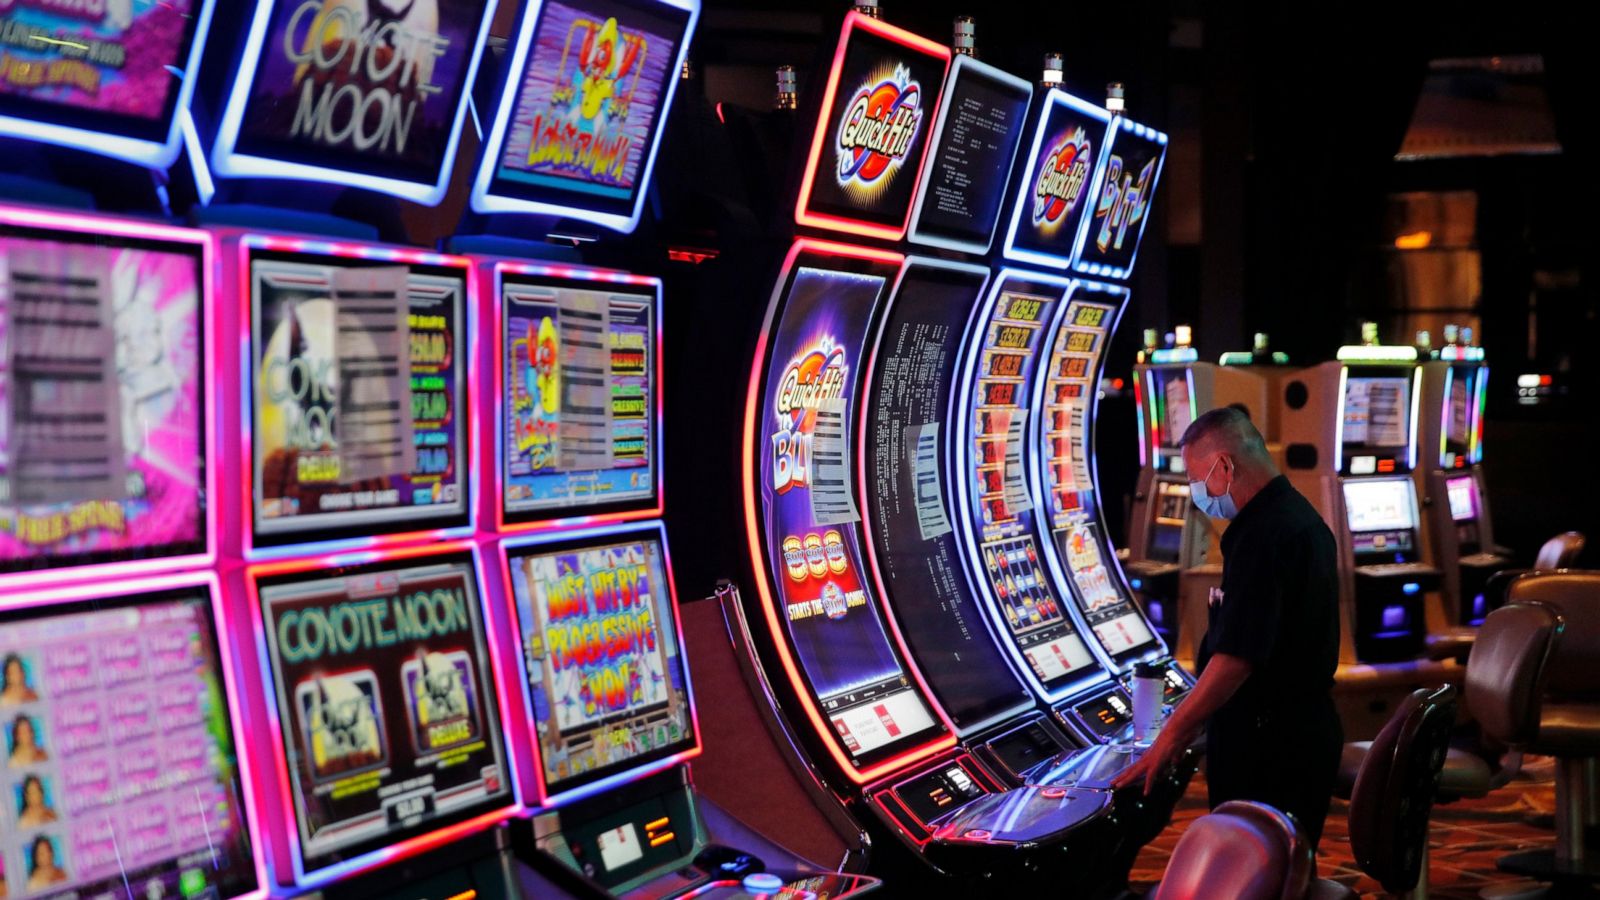 Nevada betting on health safety as Las Vegas casinos reopen - ABC News